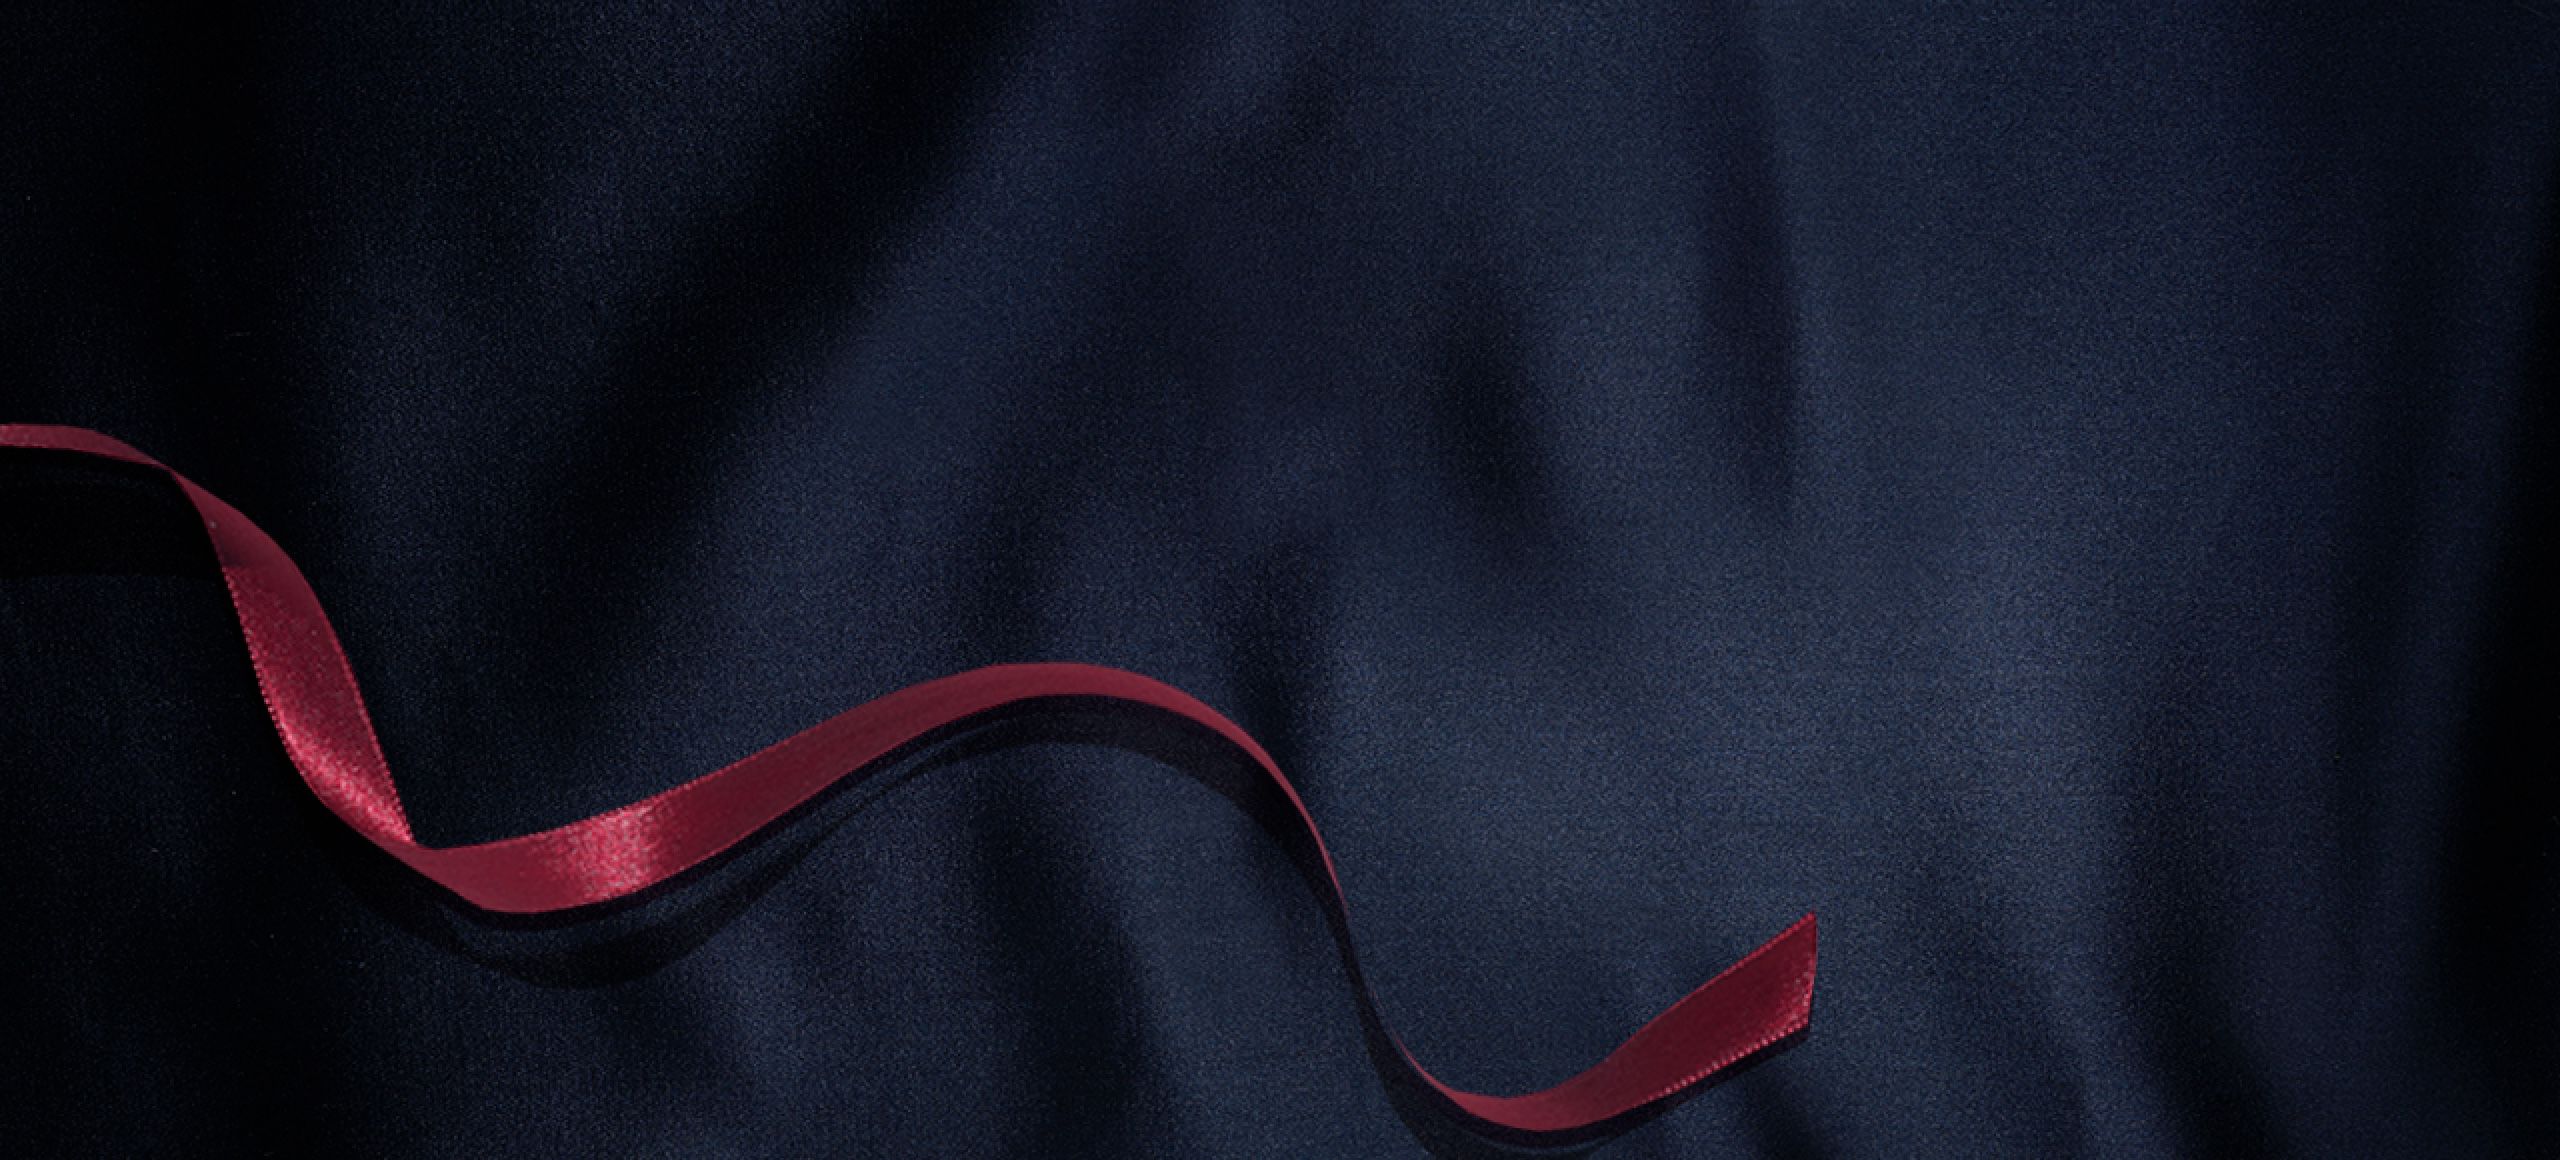 An image of a ribbon on a cloth background